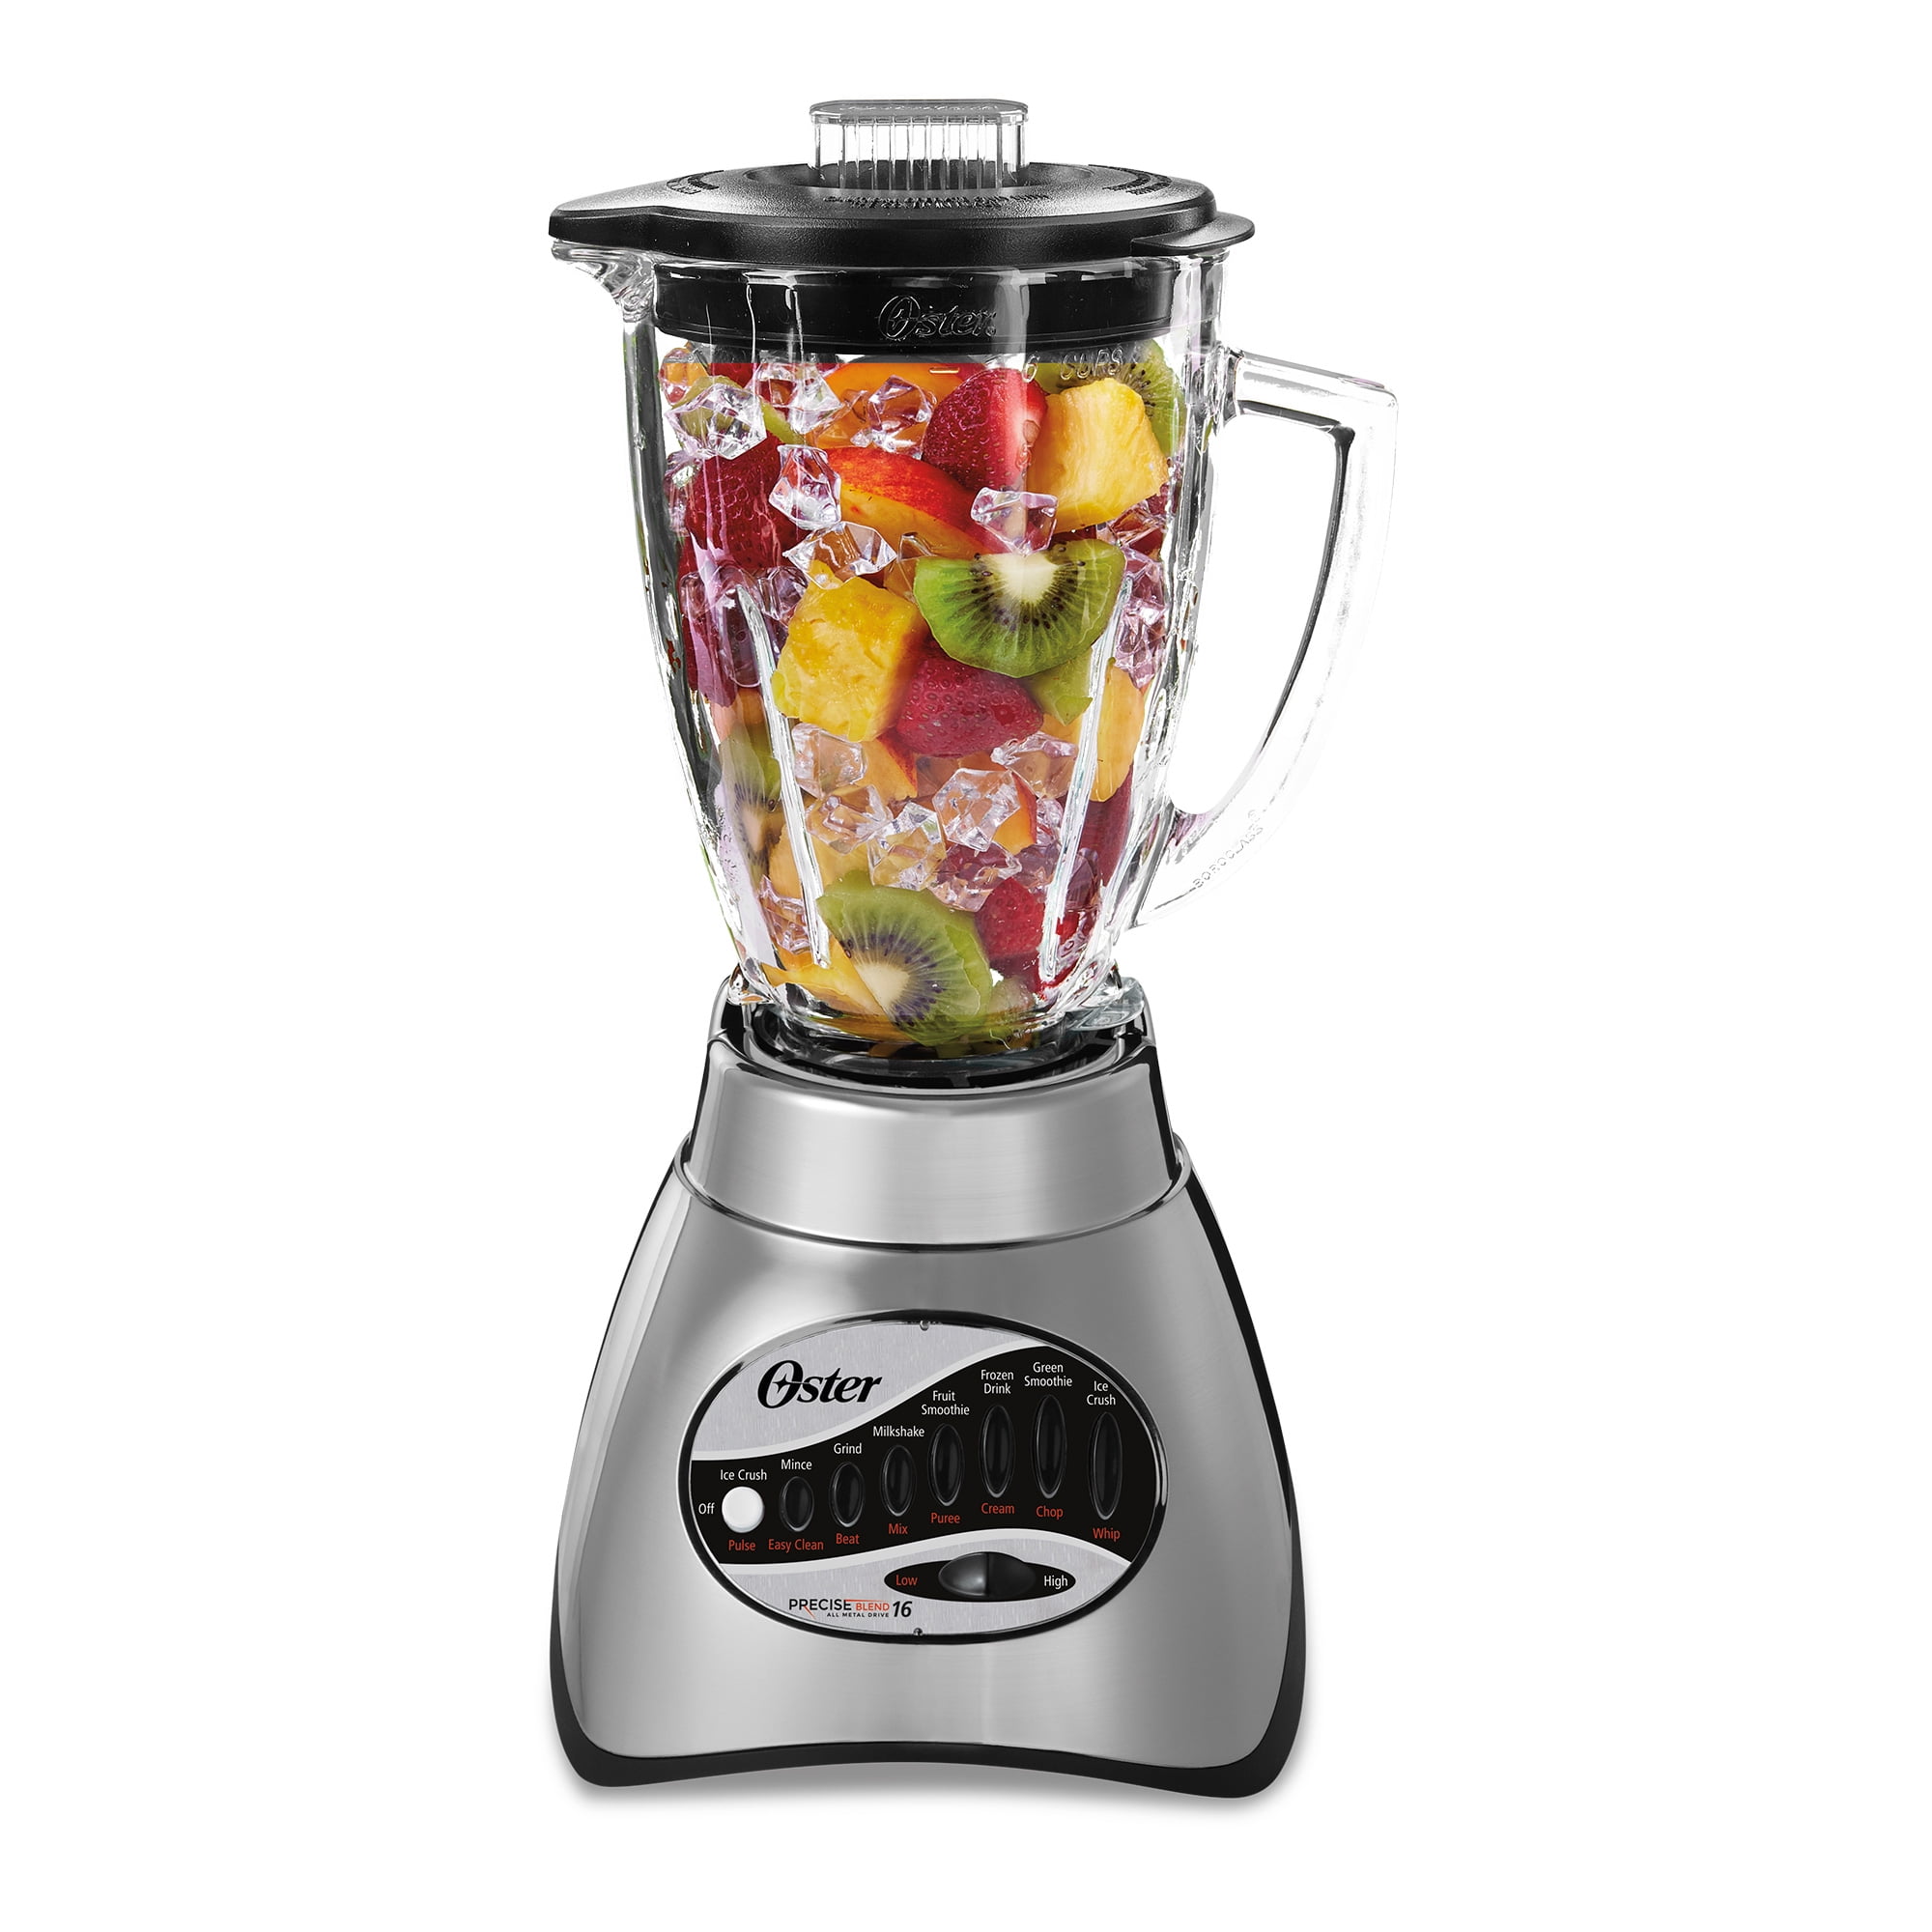 Oster Core 16-Speed Blender with Glass Jar, Black 006878 